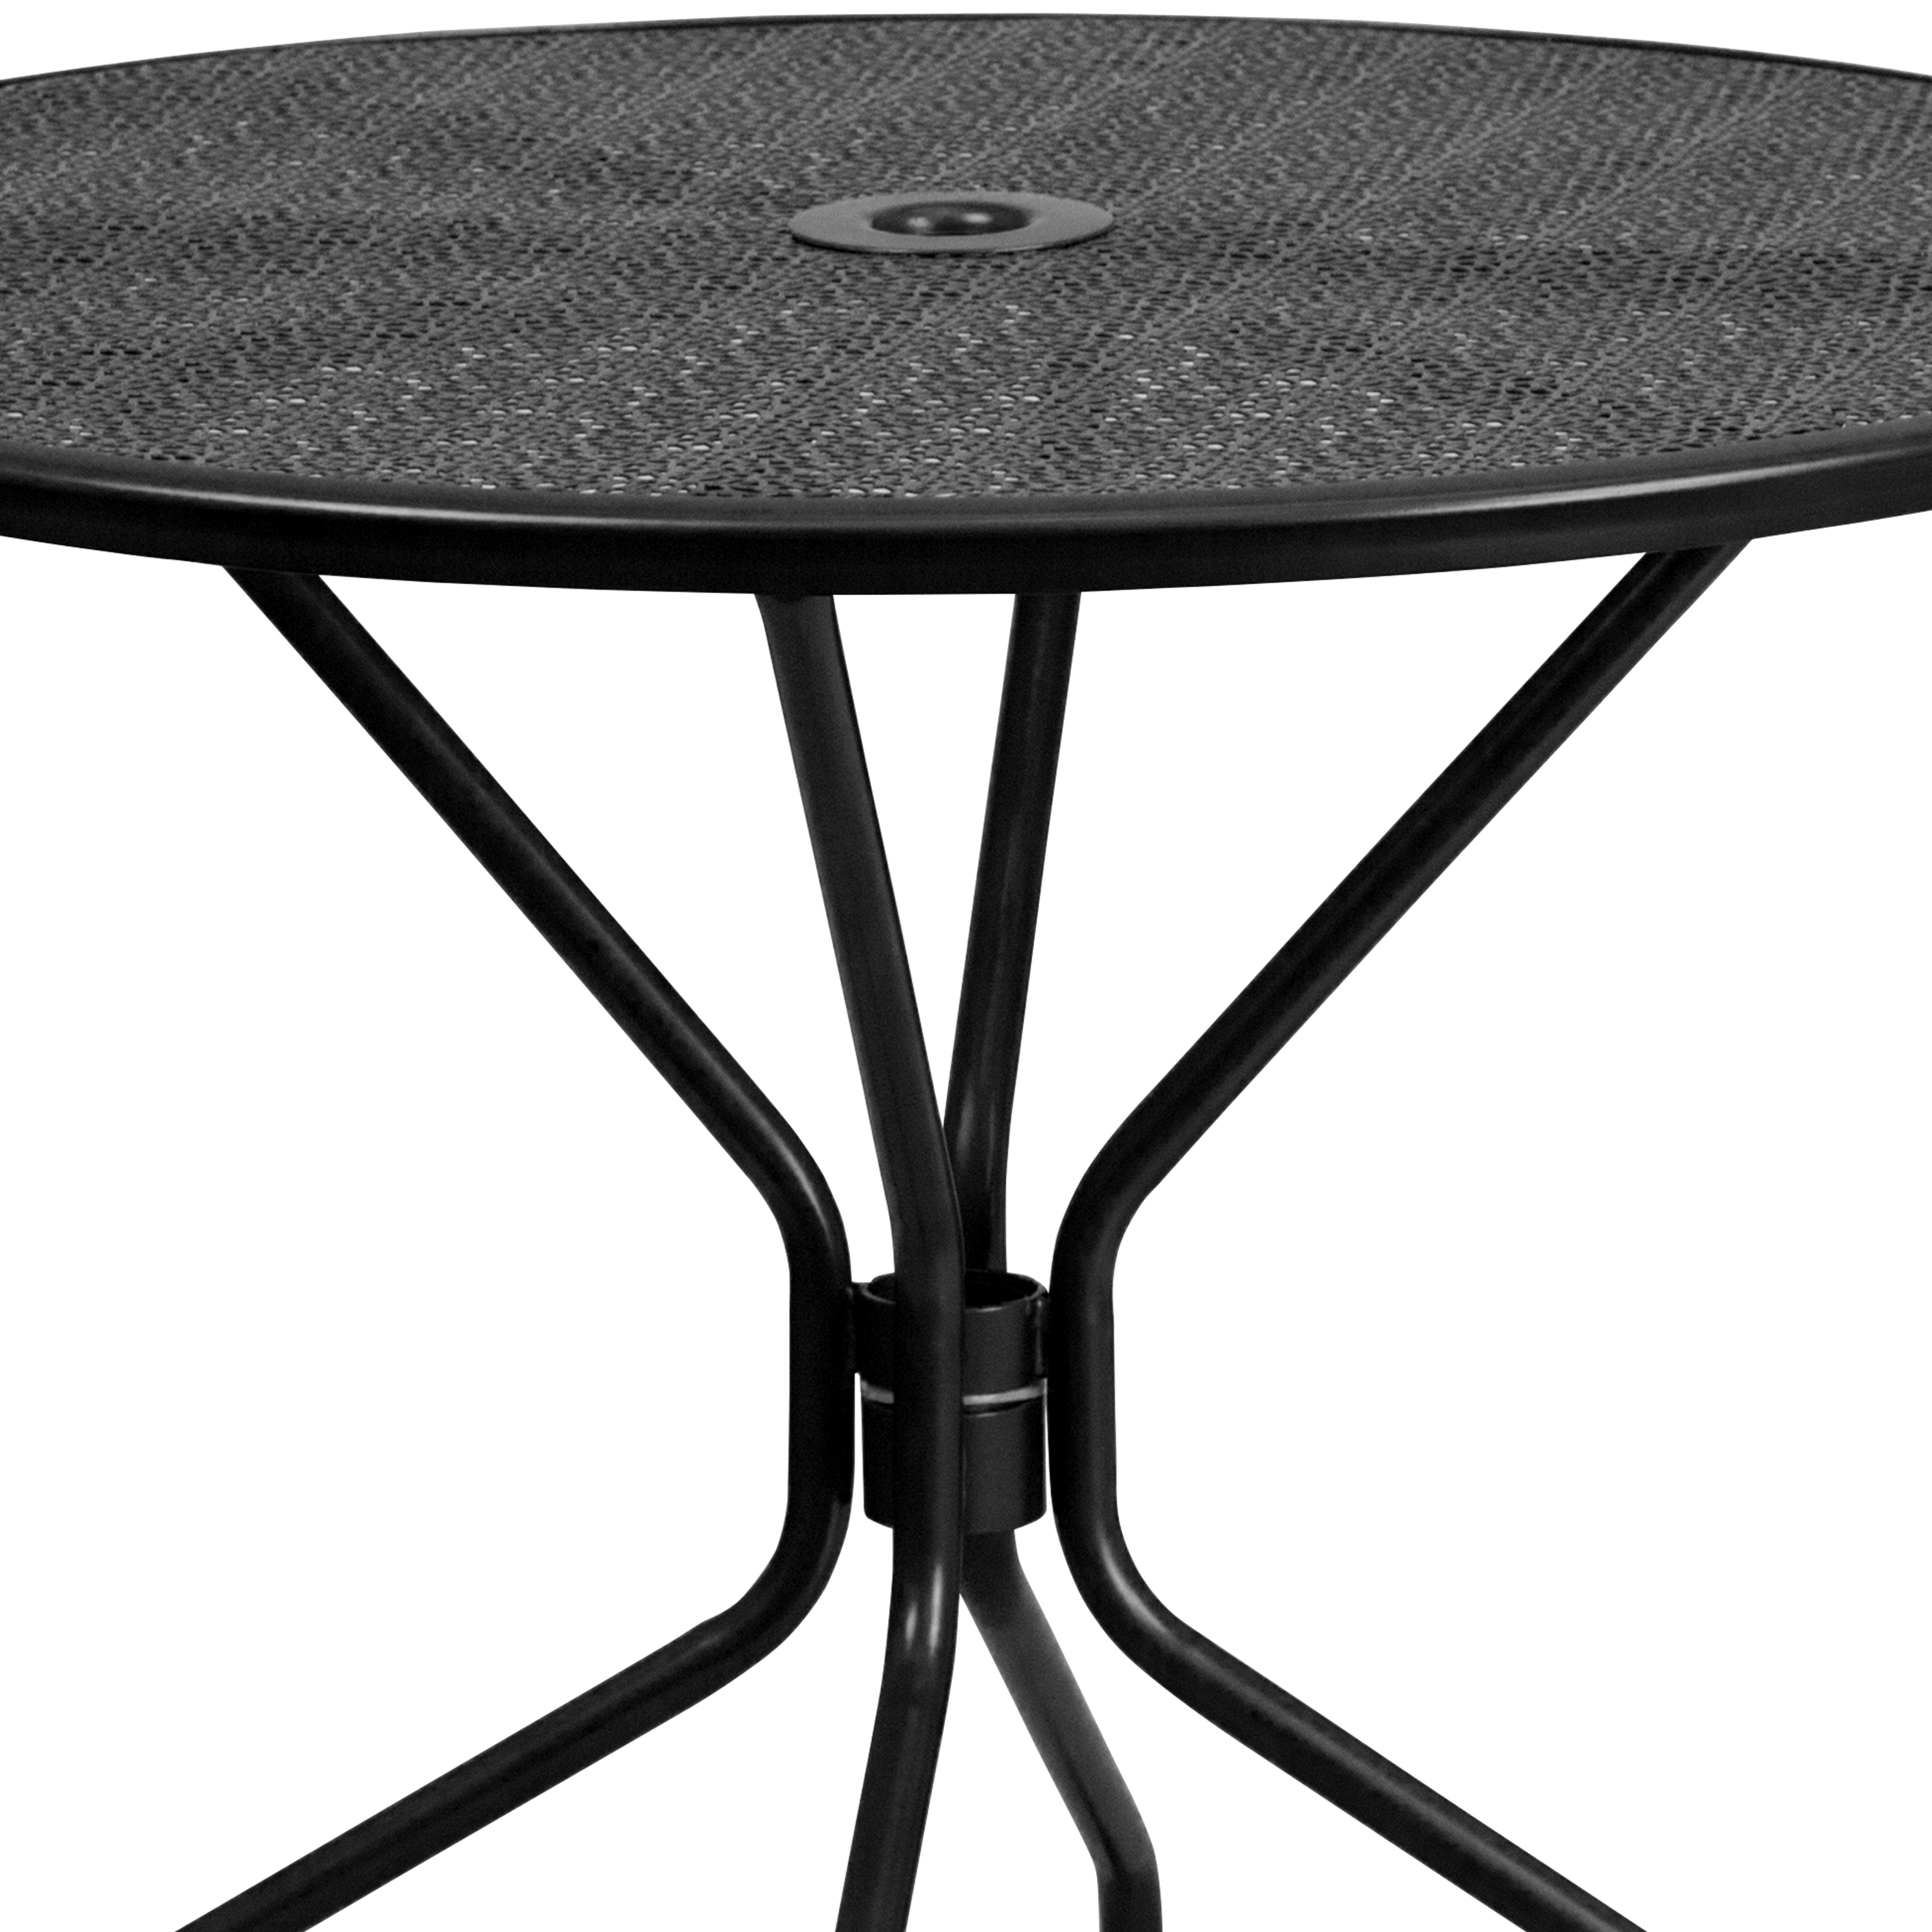 Flash Furniture Commercial Grade 35.25" Round Black Indoor-Outdoor Steel Patio Table Set with 4 Round Back Chairs - image 5 of 9